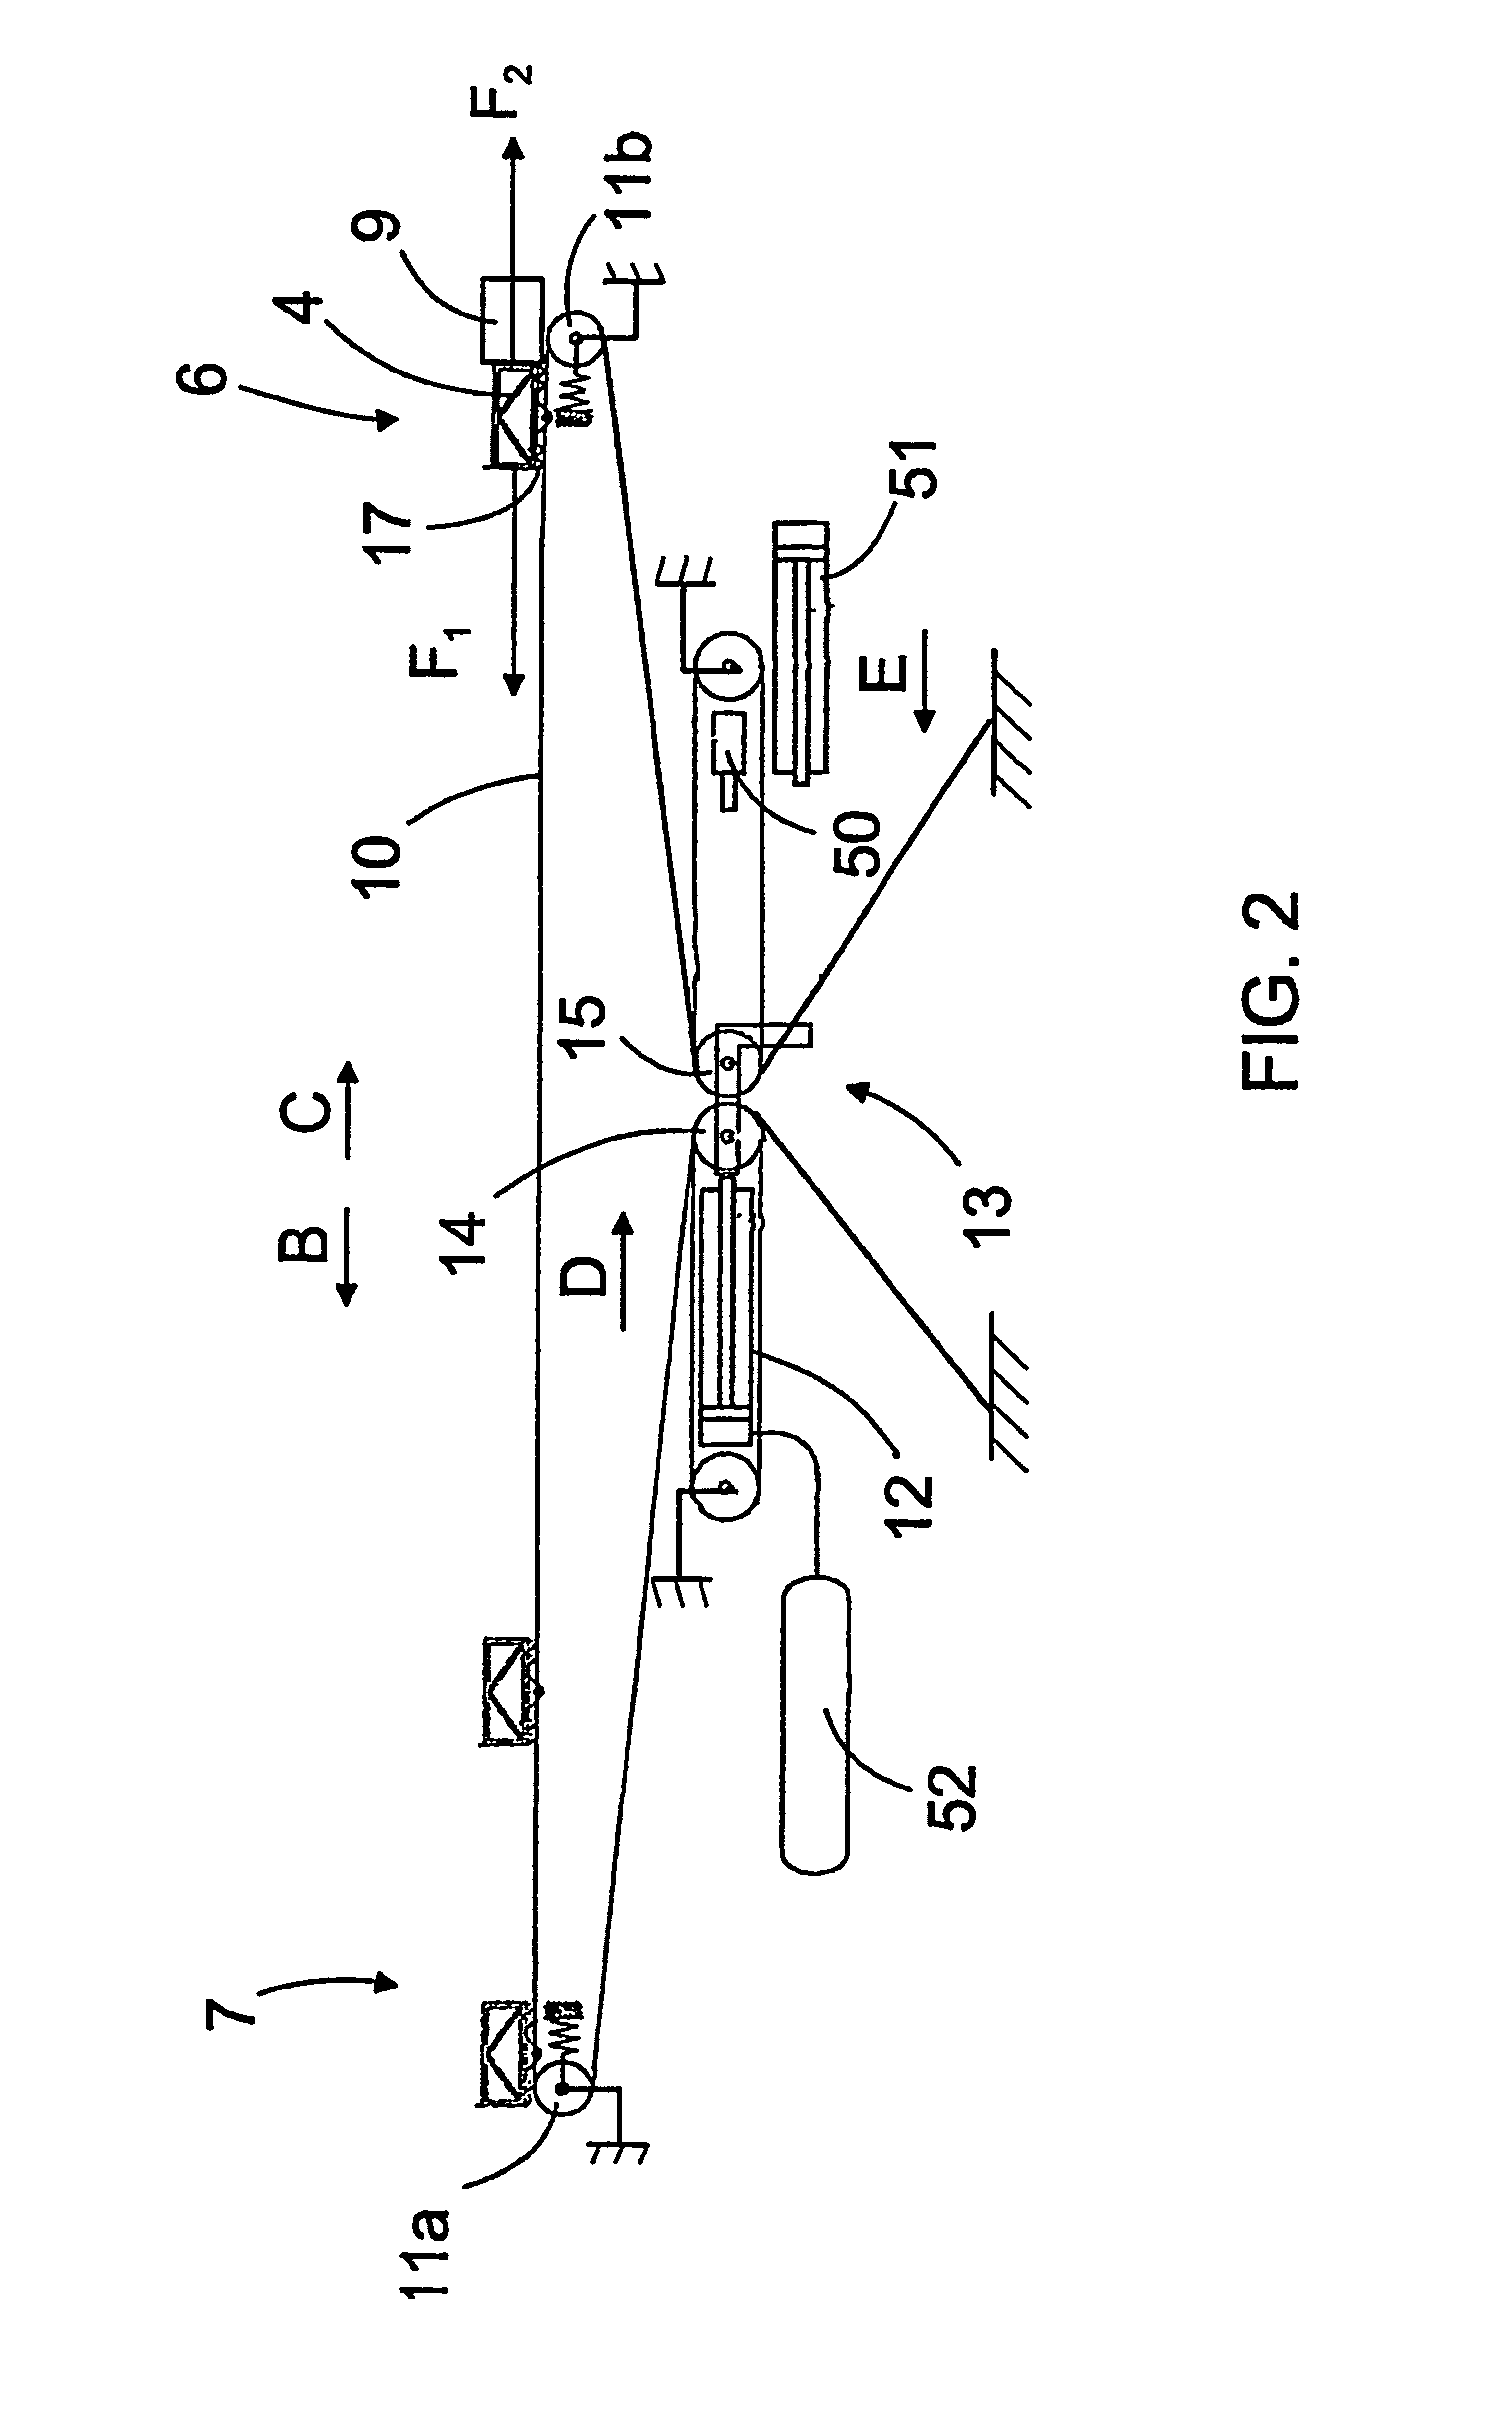 Method of launching a catapult, catapult, and locking device